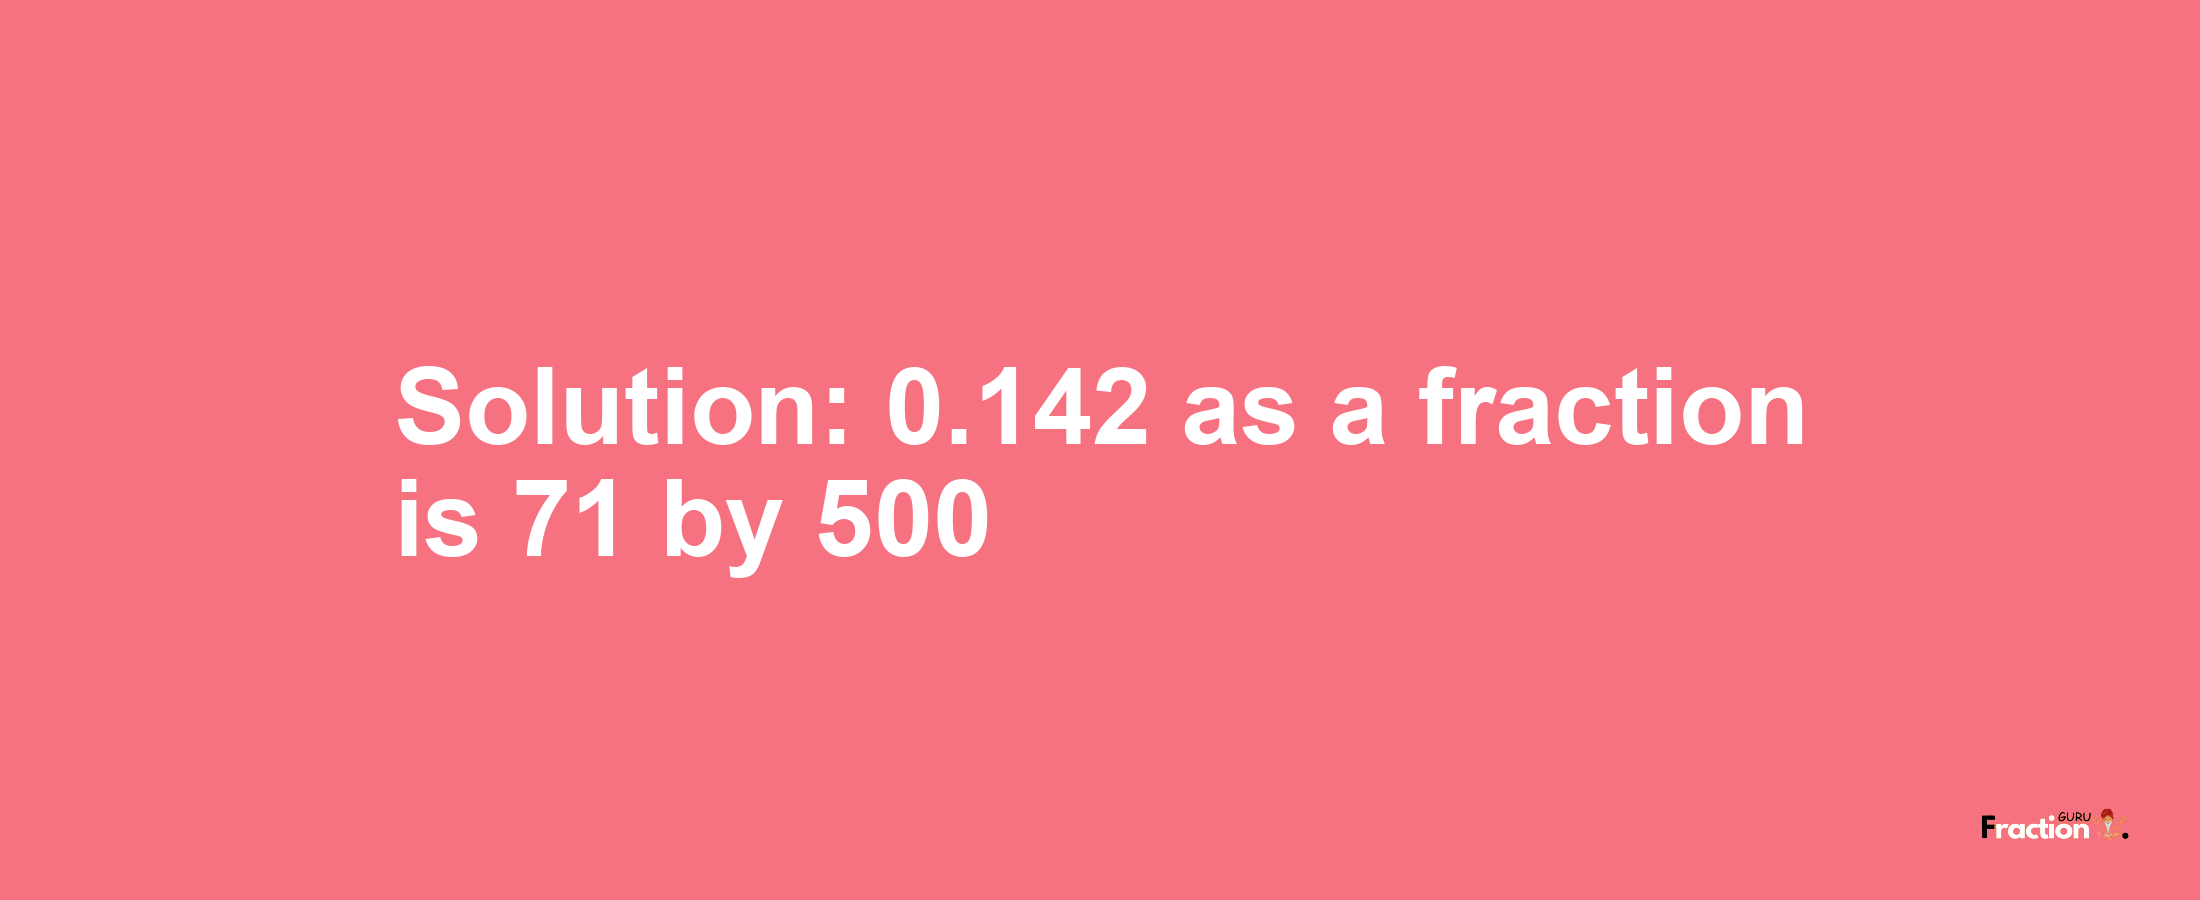 Solution:0.142 as a fraction is 71/500